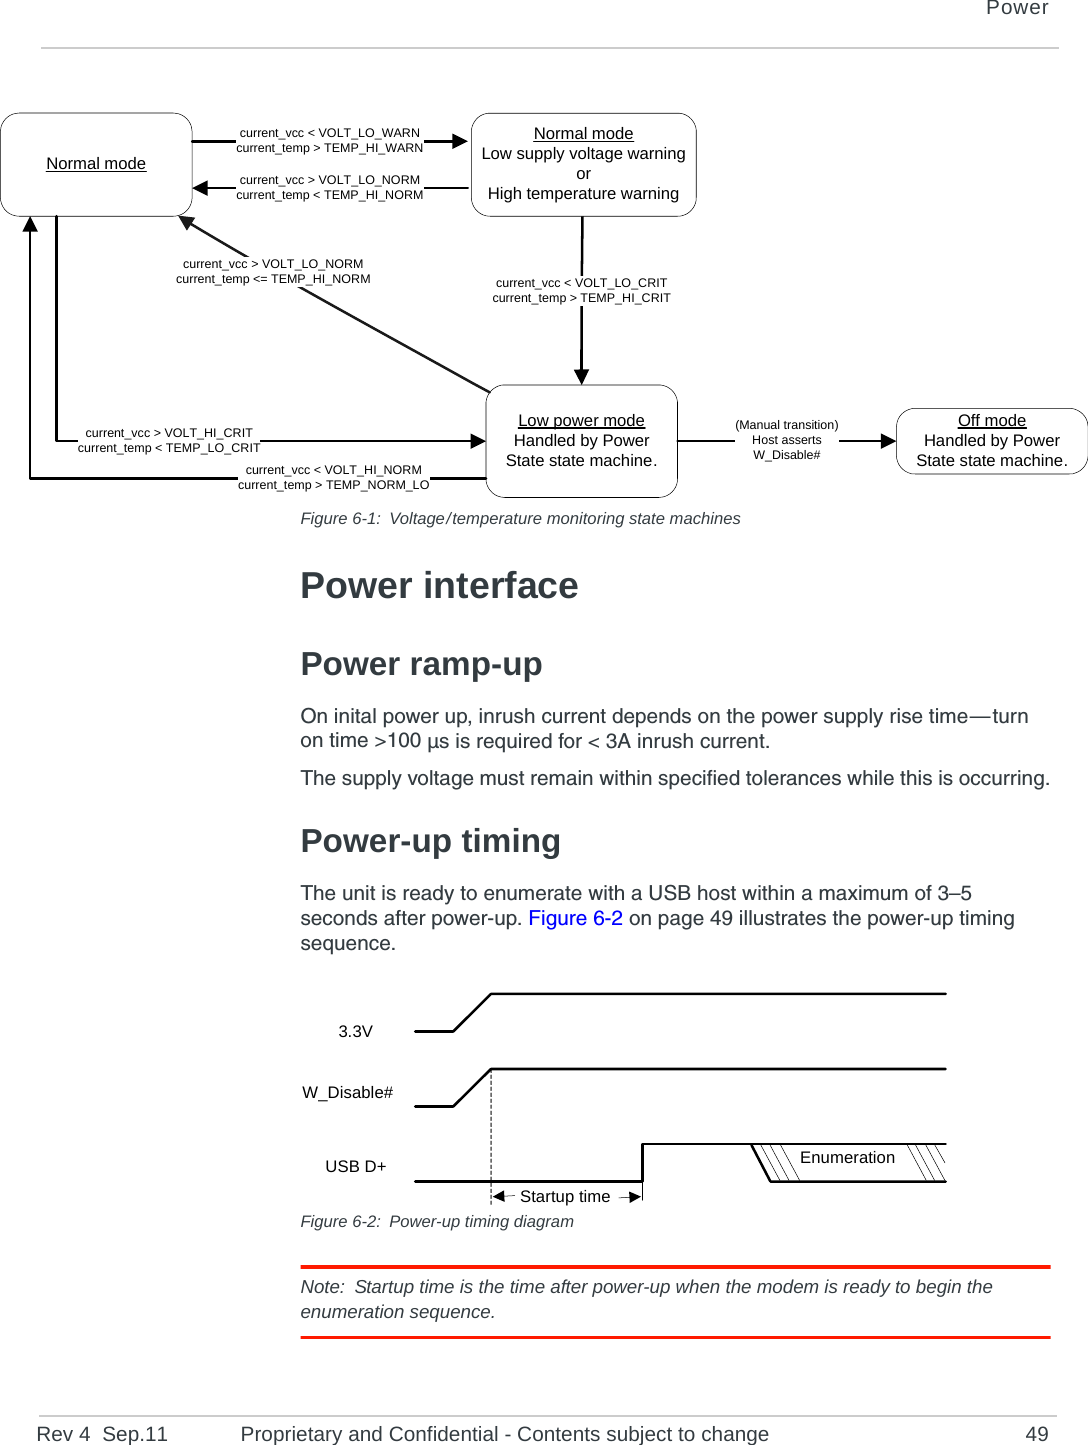 PowerRev 4  Sep.11 Proprietary and Confidential - Contents subject to change 49Figure 6-1: Voltage / temperature monitoring state machinesPower interfacePower ramp-upOn inital power up, inrush current depends on the power supply rise time — turn on time &gt;100 µs is required for &lt; 3A inrush current.The supply voltage must remain within specified tolerances while this is occurring.Power-up timingThe unit is ready to enumerate with a USB host within a maximum of 3–5 seconds after power-up. Figure 6-2 on page 49 illustrates the power-up timing sequence.Figure 6-2: Power-up timing diagramNote: Startup time is the time after power-up when the modem is ready to begin the enumeration sequence.Off modeHandled by Power State state machine.Normal modeLow power modeHandled by Power State state machine.current_vcc &gt; VOLT_LO_NORMcurrent_temp &lt;= TEMP_HI_NORM current_vcc &lt; VOLT_LO_CRITcurrent_temp &gt; TEMP_HI_CRITcurrent_vcc &gt; VOLT_LO_NORMcurrent_temp &lt; TEMP_HI_NORMcurrent_vcc &lt; VOLT_LO_WARNcurrent_temp &gt; TEMP_HI_WARNcurrent_vcc &lt; VOLT_HI_NORMcurrent_temp &gt; TEMP_NORM_LOcurrent_vcc &gt; VOLT_HI_CRITcurrent_temp &lt; TEMP_LO_CRIT(Manual transition)Host assertsW_Disable#Normal modeLow supply voltage warningorHigh temperature warningEnumeration3.3VW_Disable#USB D+Startup time